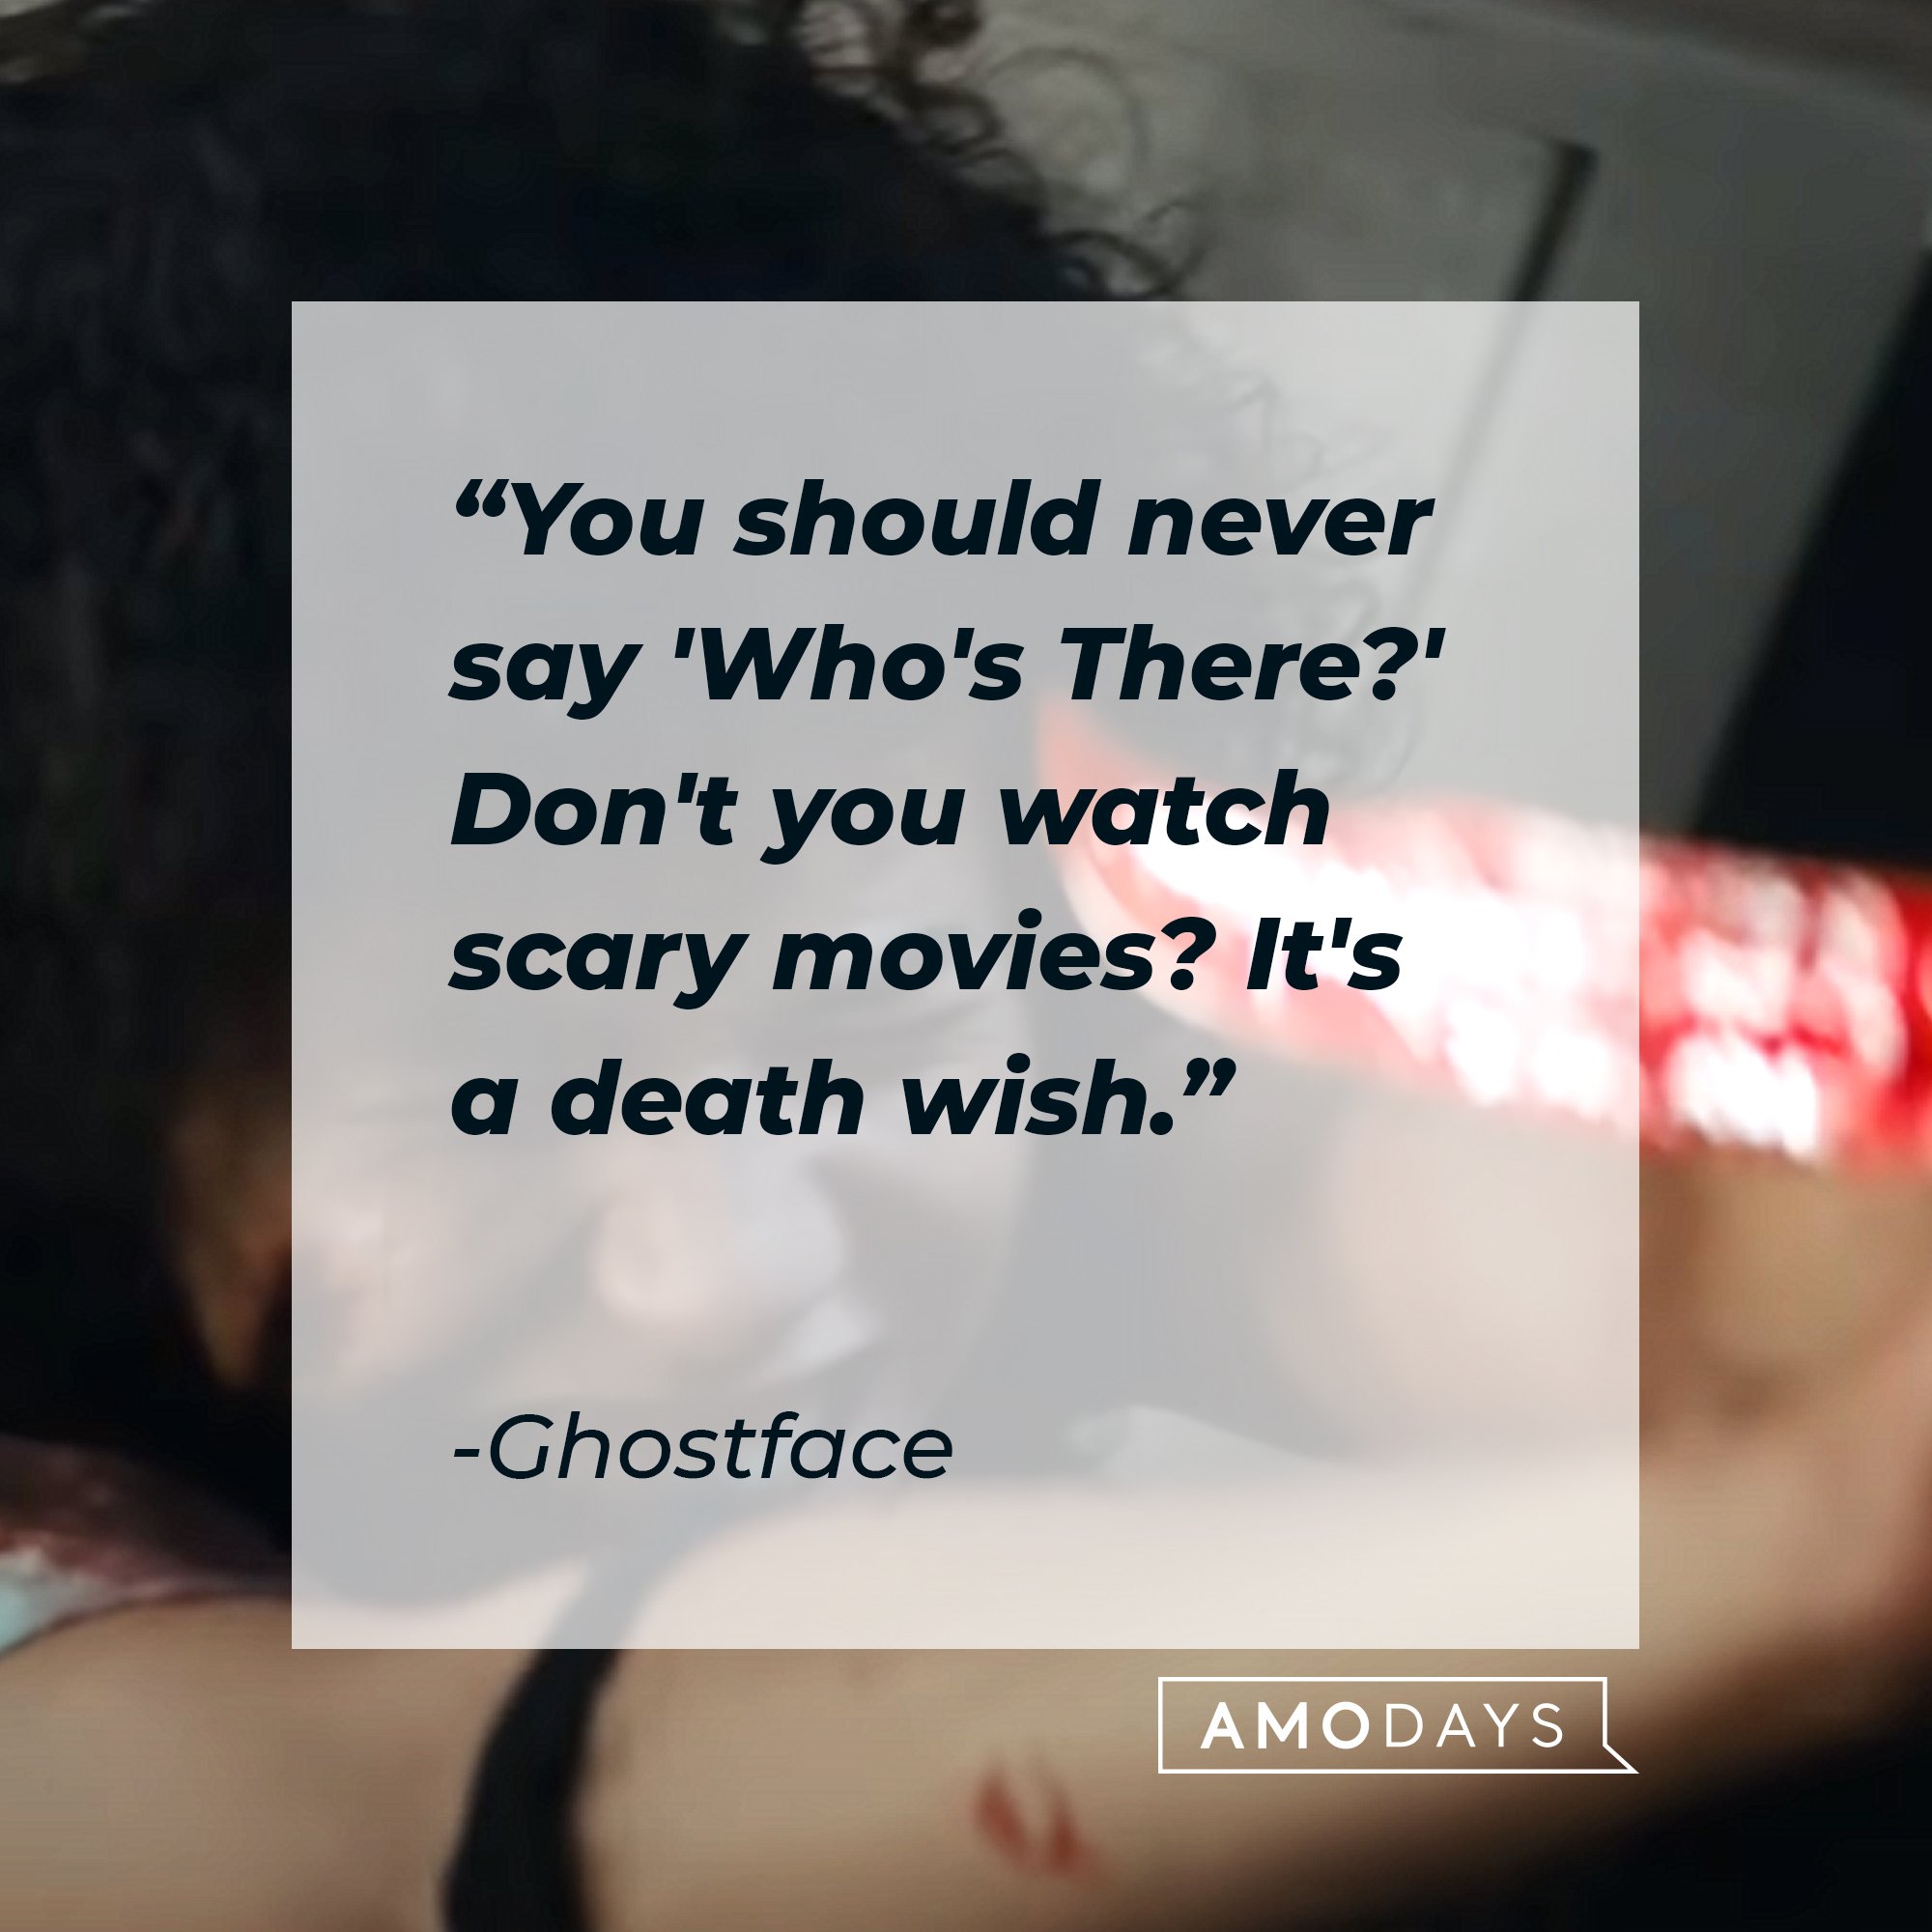 Ghostface's quote: "You should never say 'Who's There?' Don't you watch scary movies? It's a death wish." | Image: AmoDays